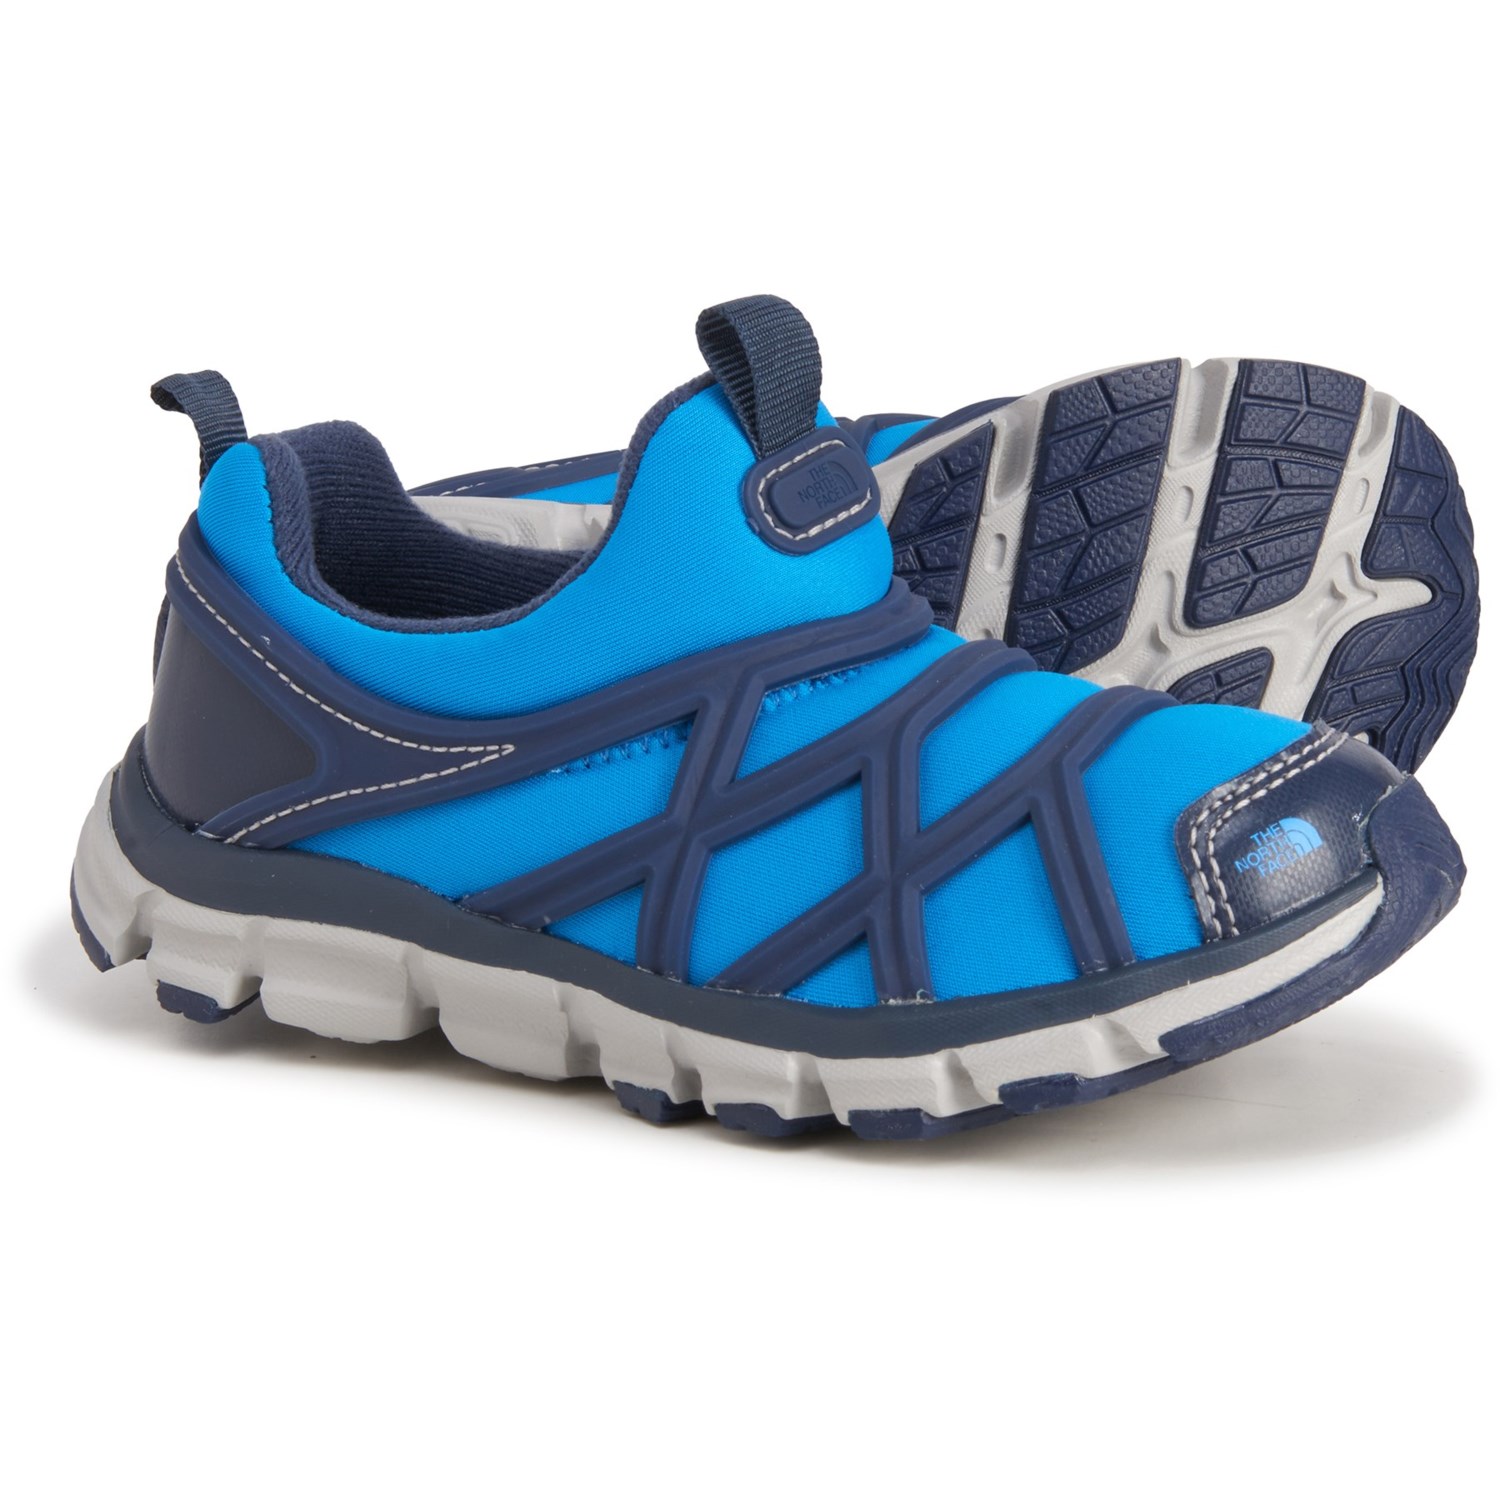 The North Face Litewave Shoes (For Boys)